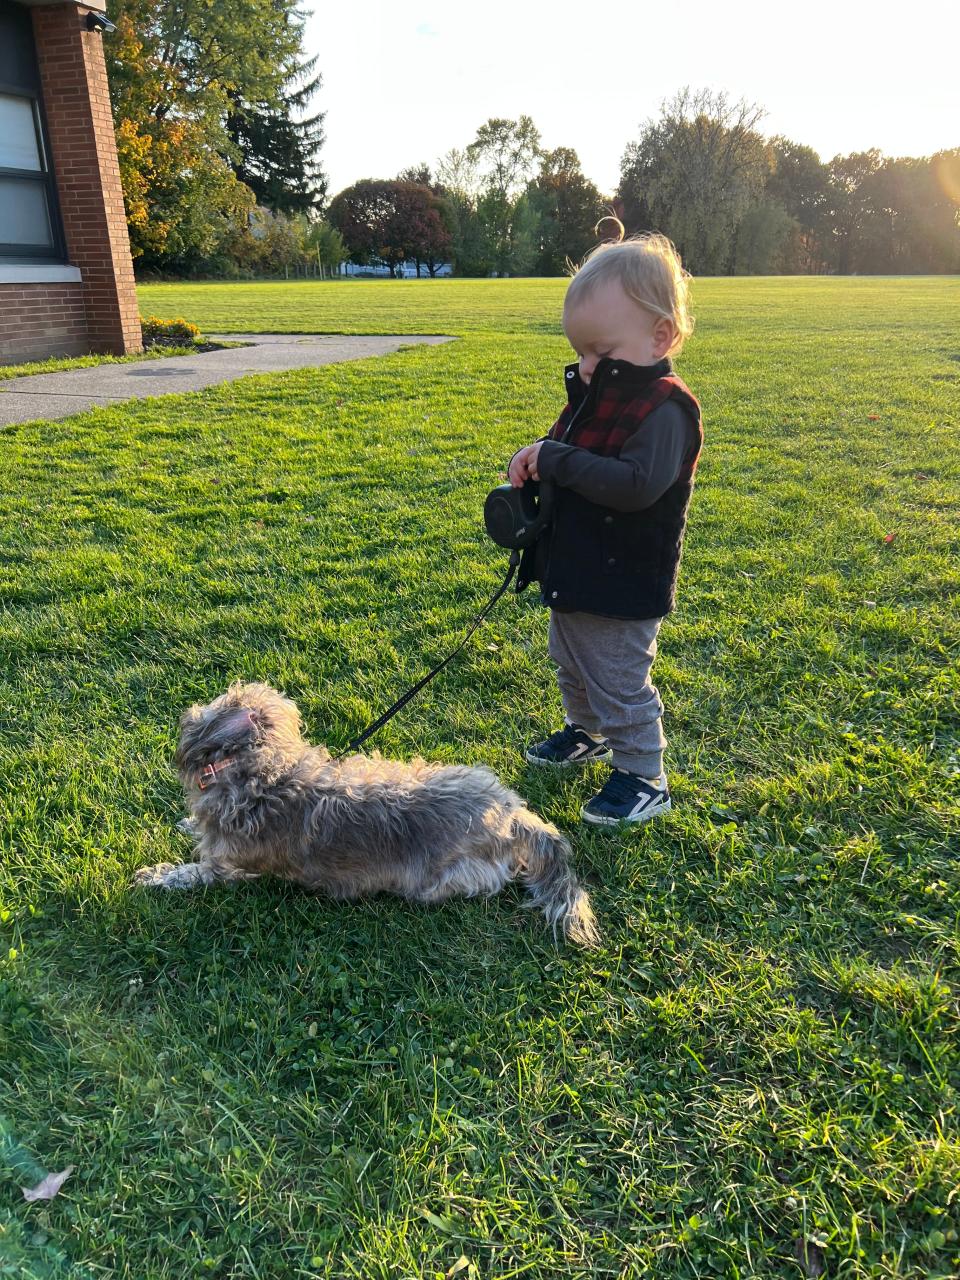 Tess’ dog Alfie and son Henry, who is now 2, have become good friends.